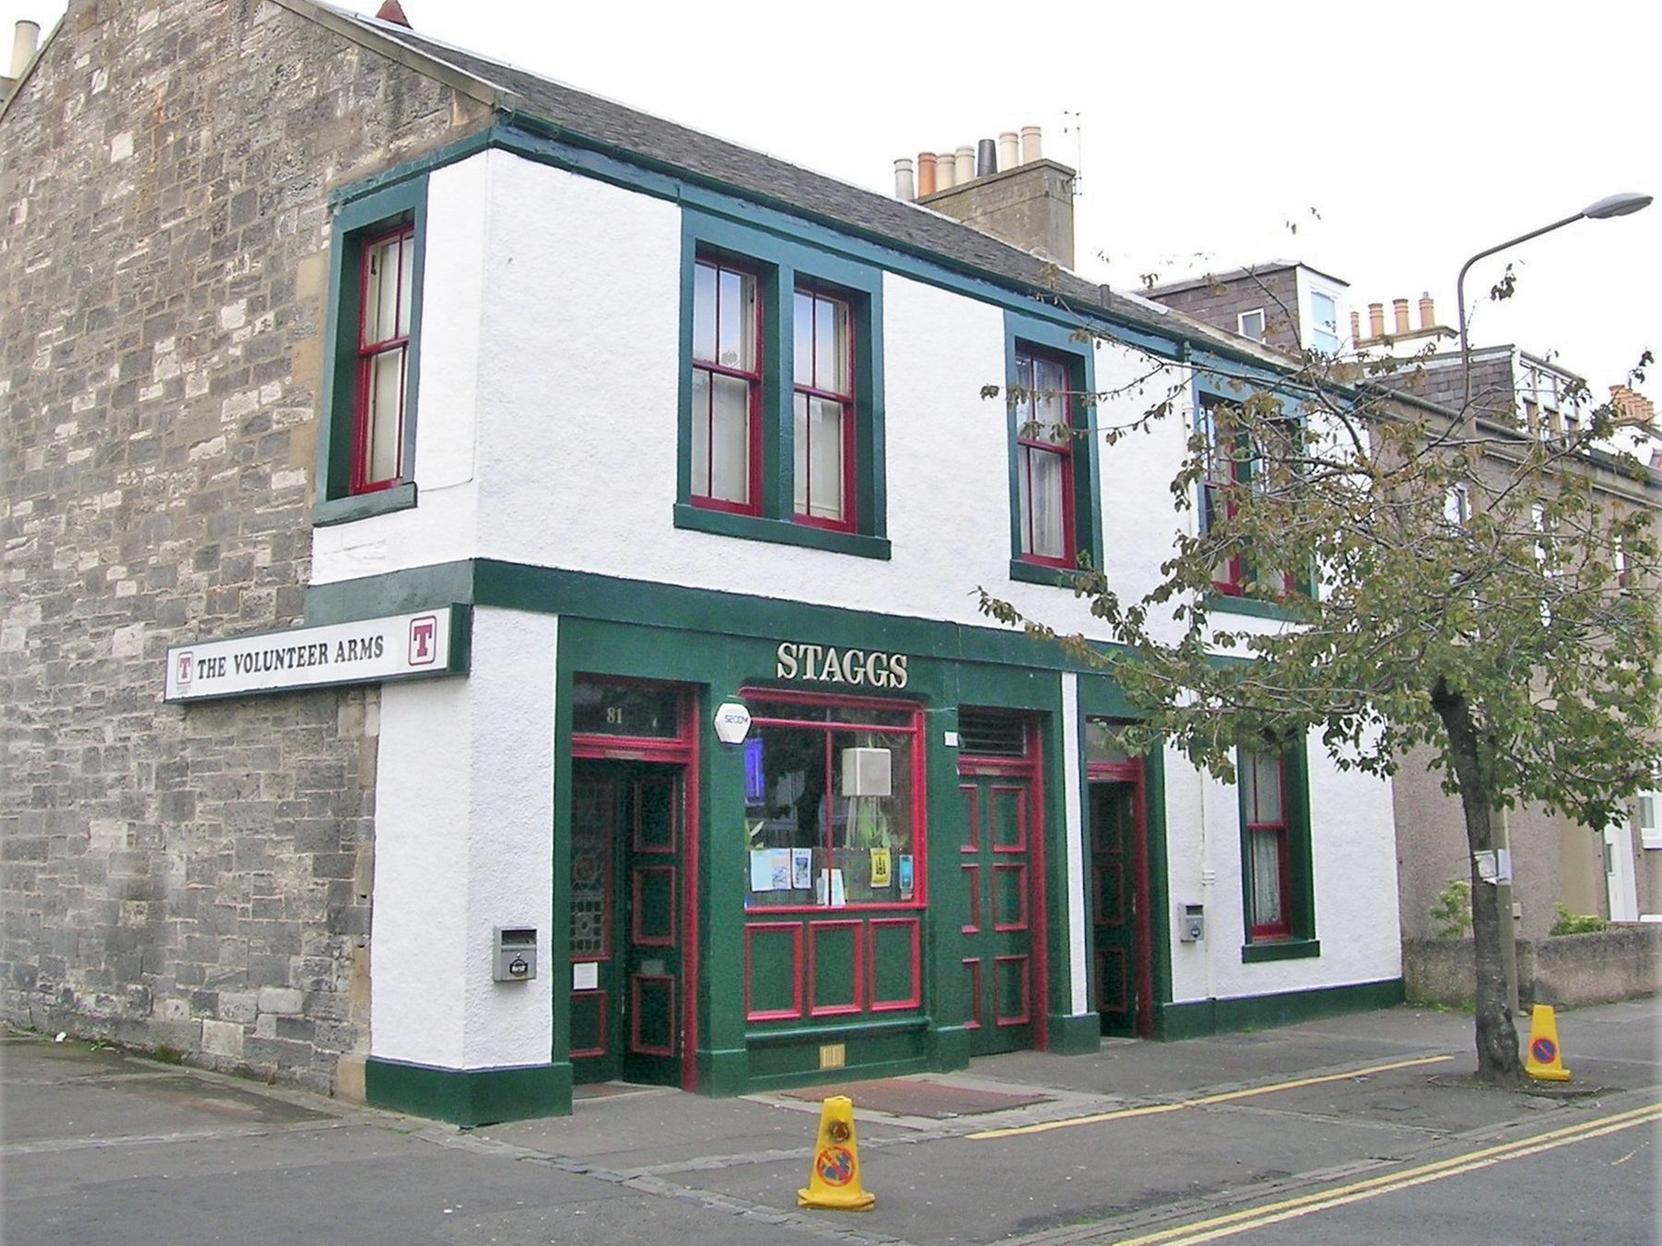 Staggs Bar in Musselburgh nestles behind the Brunton Theatre in Musselburgh and took the top prize for pubs in the Lothians